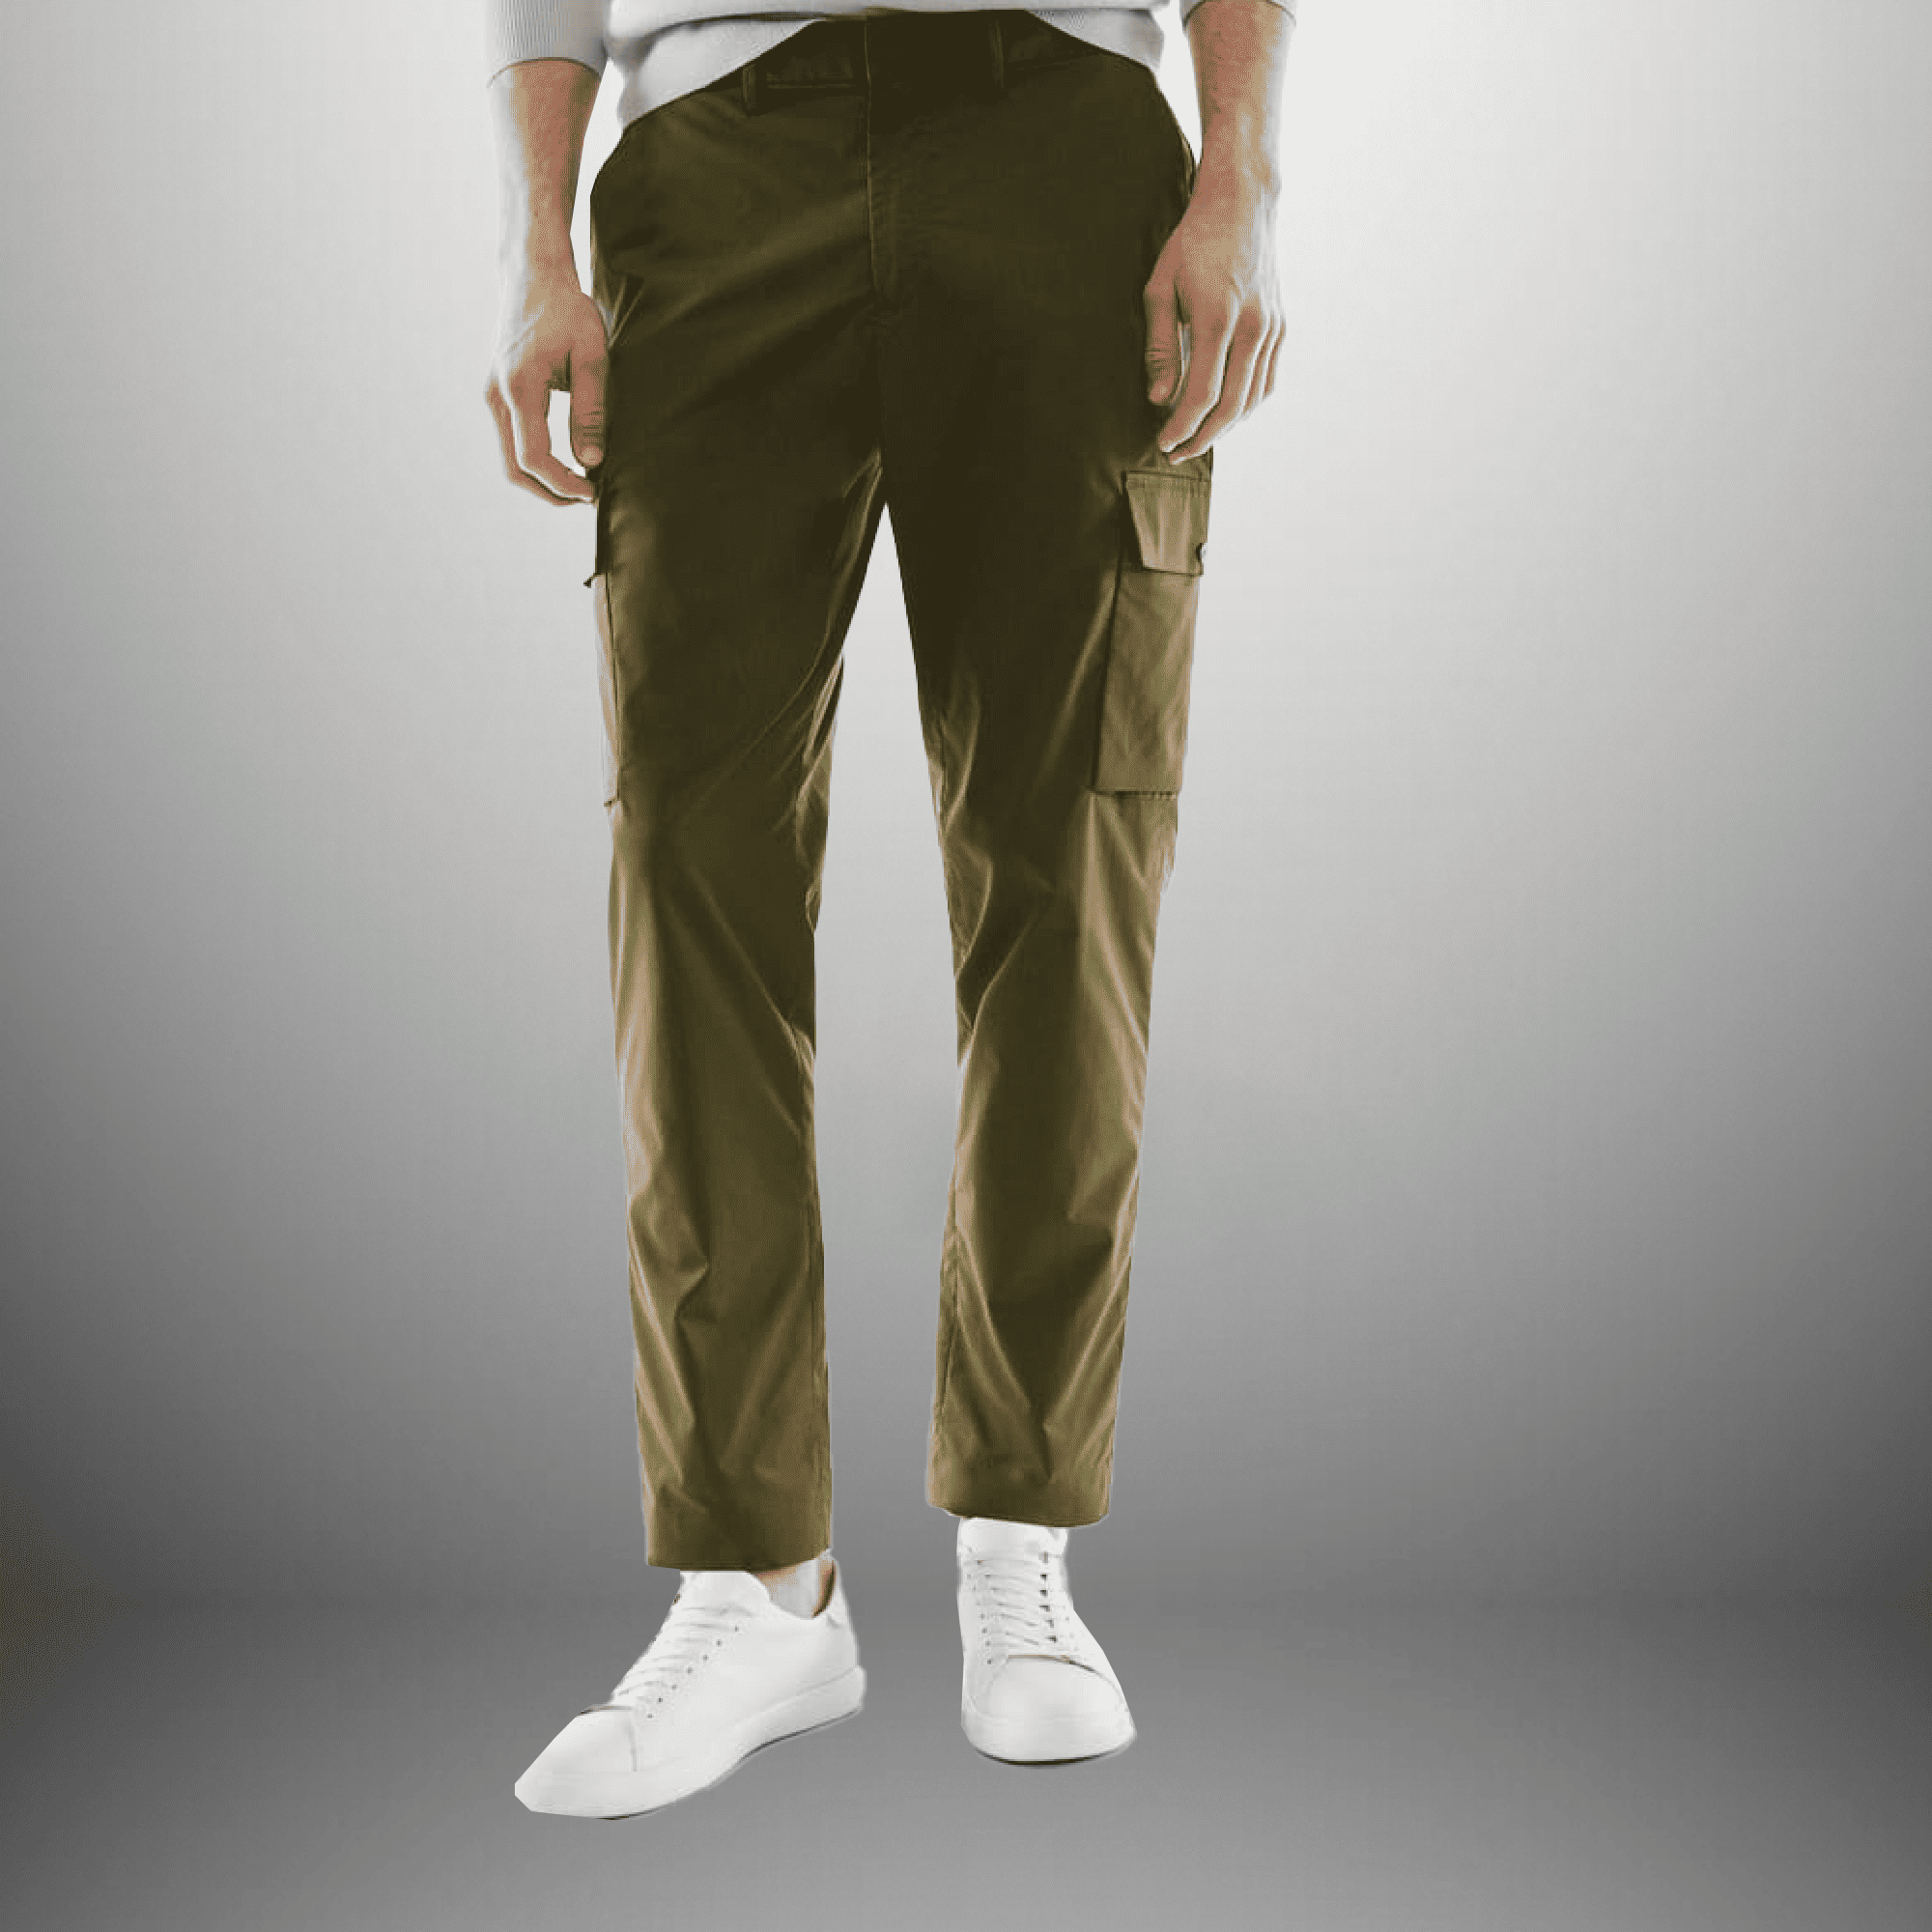 Men's Olive Green Relaxed Fit Cargo Pant-RMT007